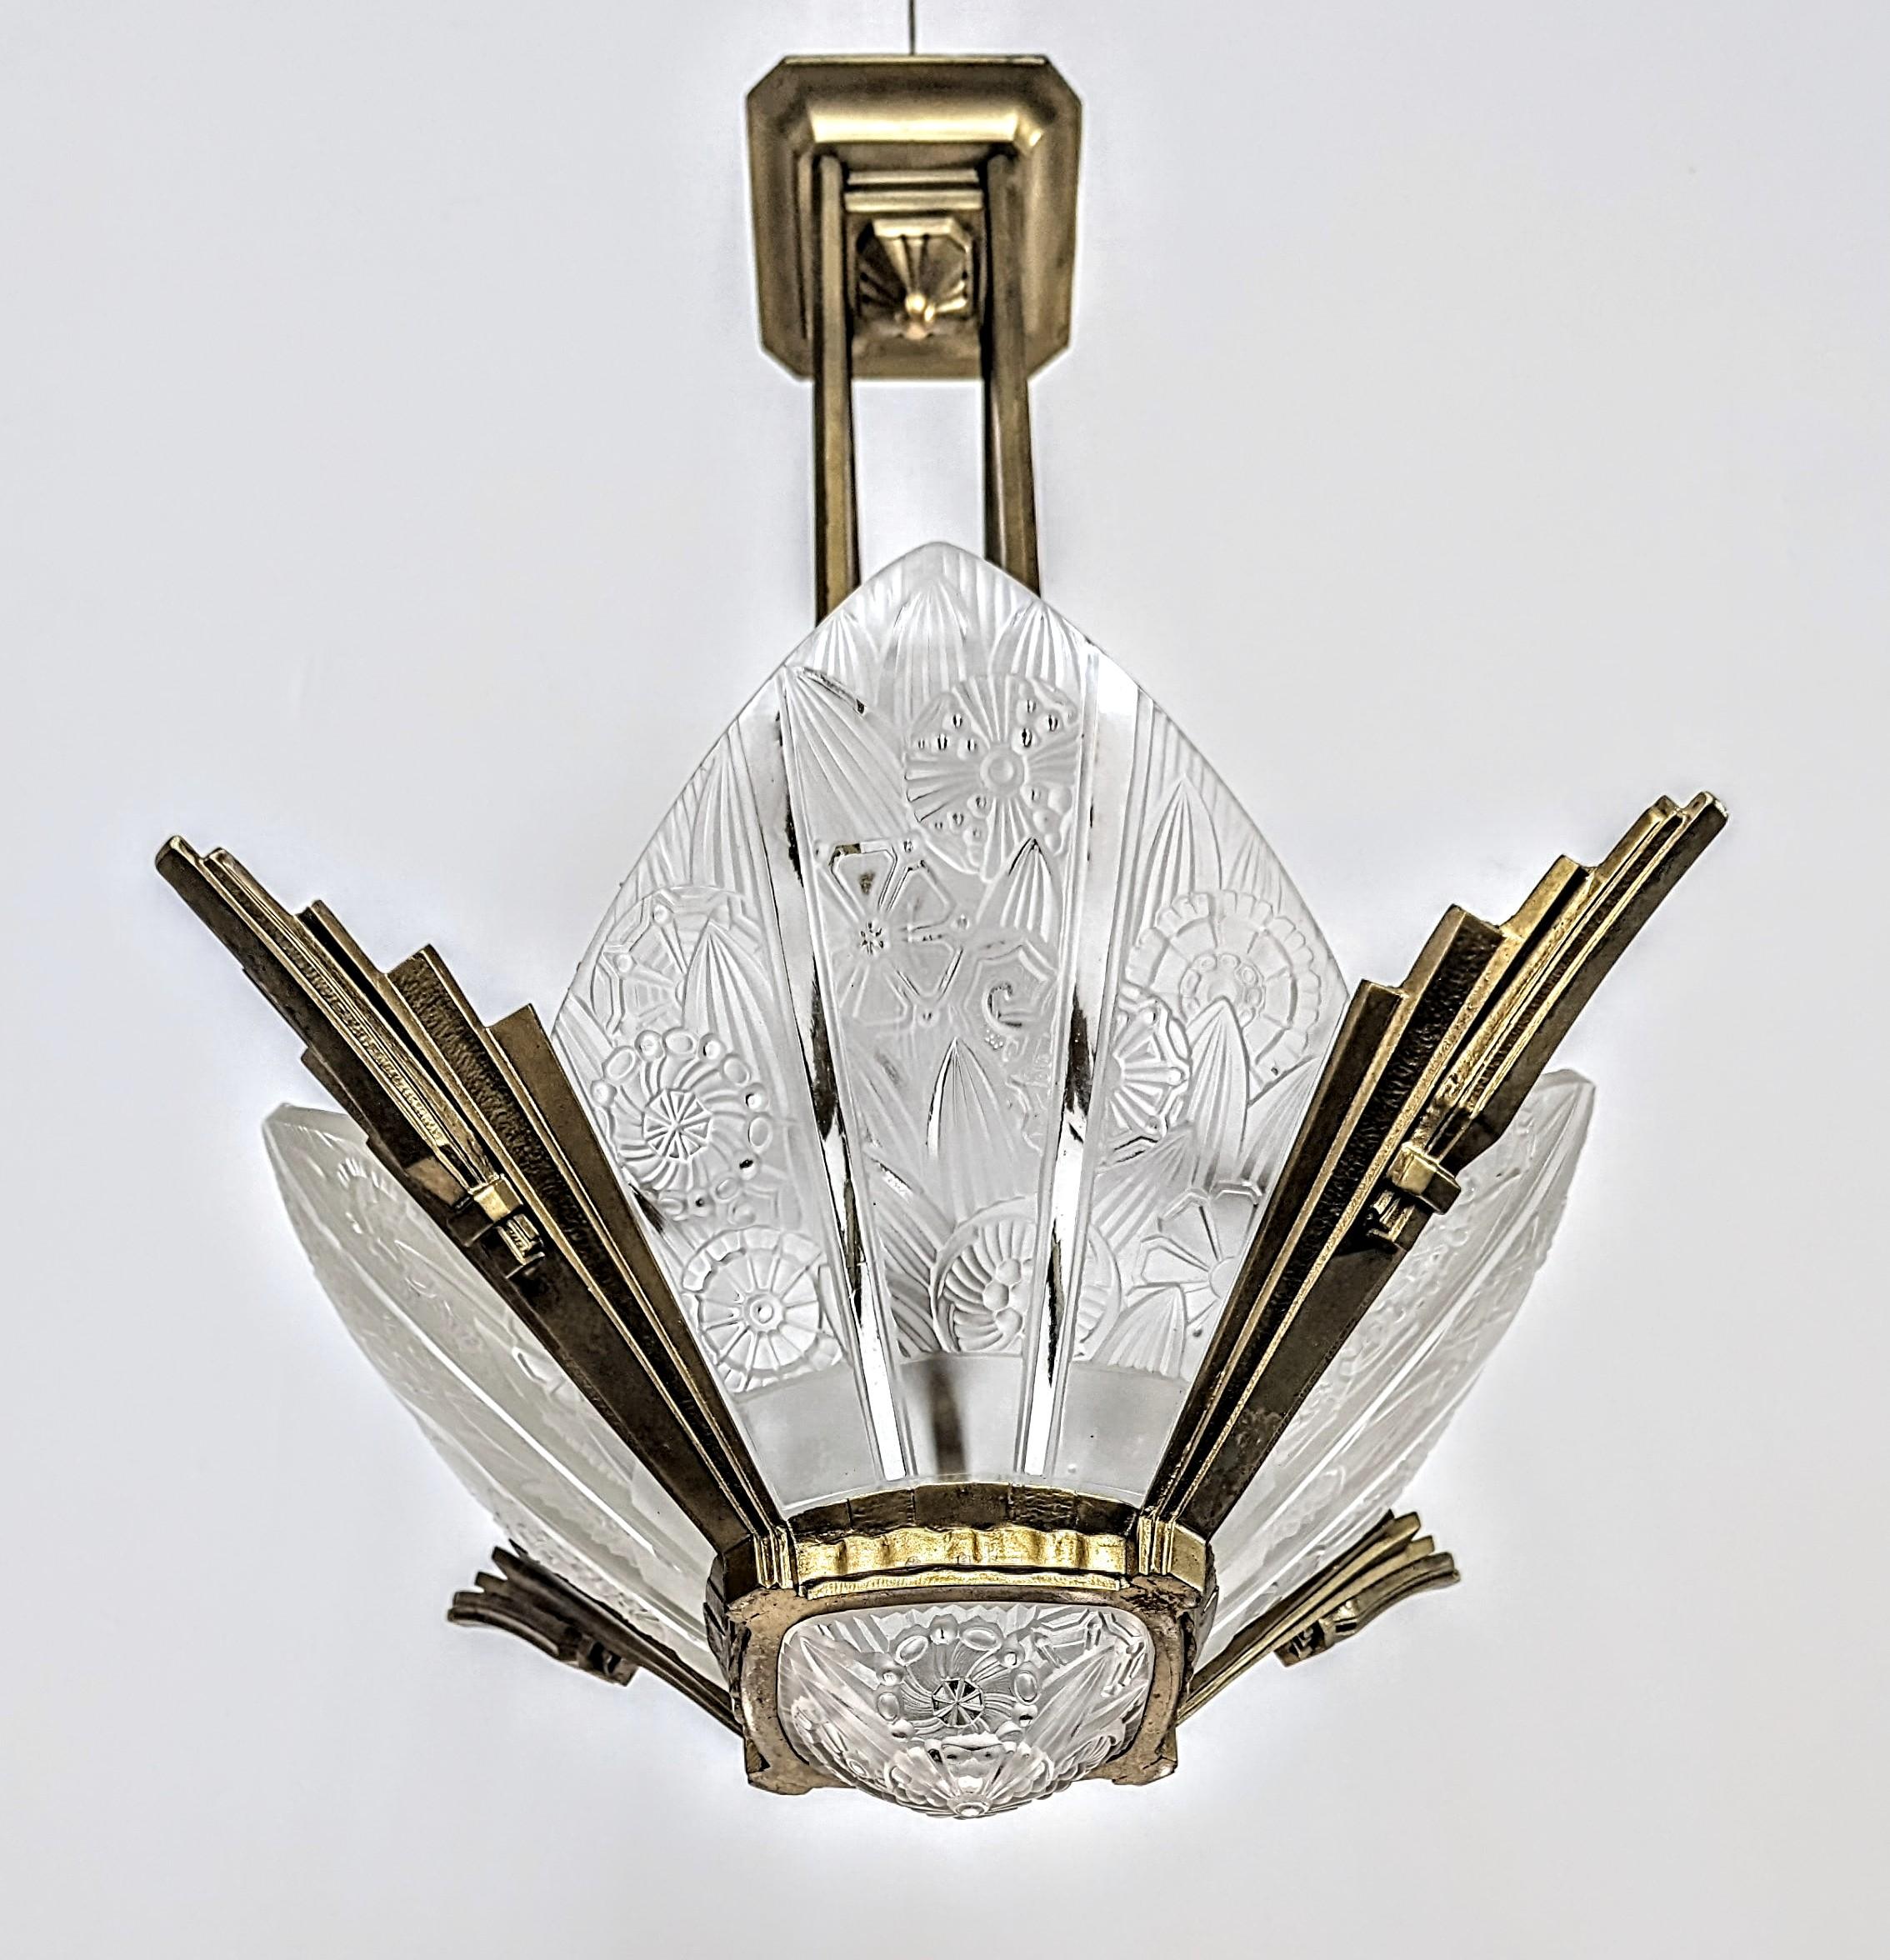 A rare French Art Deco chandelier Signed by the French Artist 